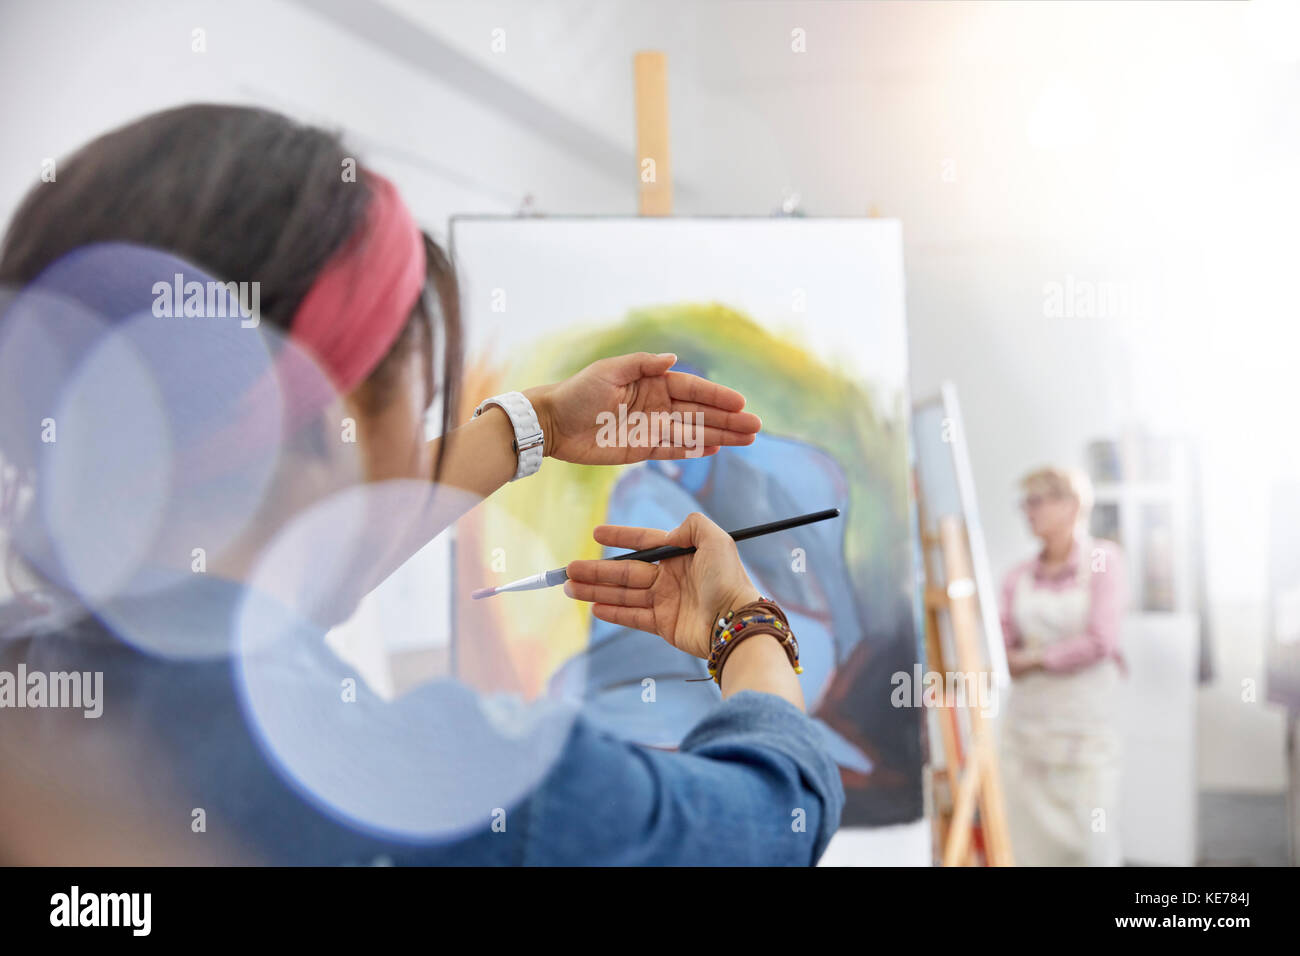 Female artist gesturing, framing painting on easel in art class studio Stock Photo